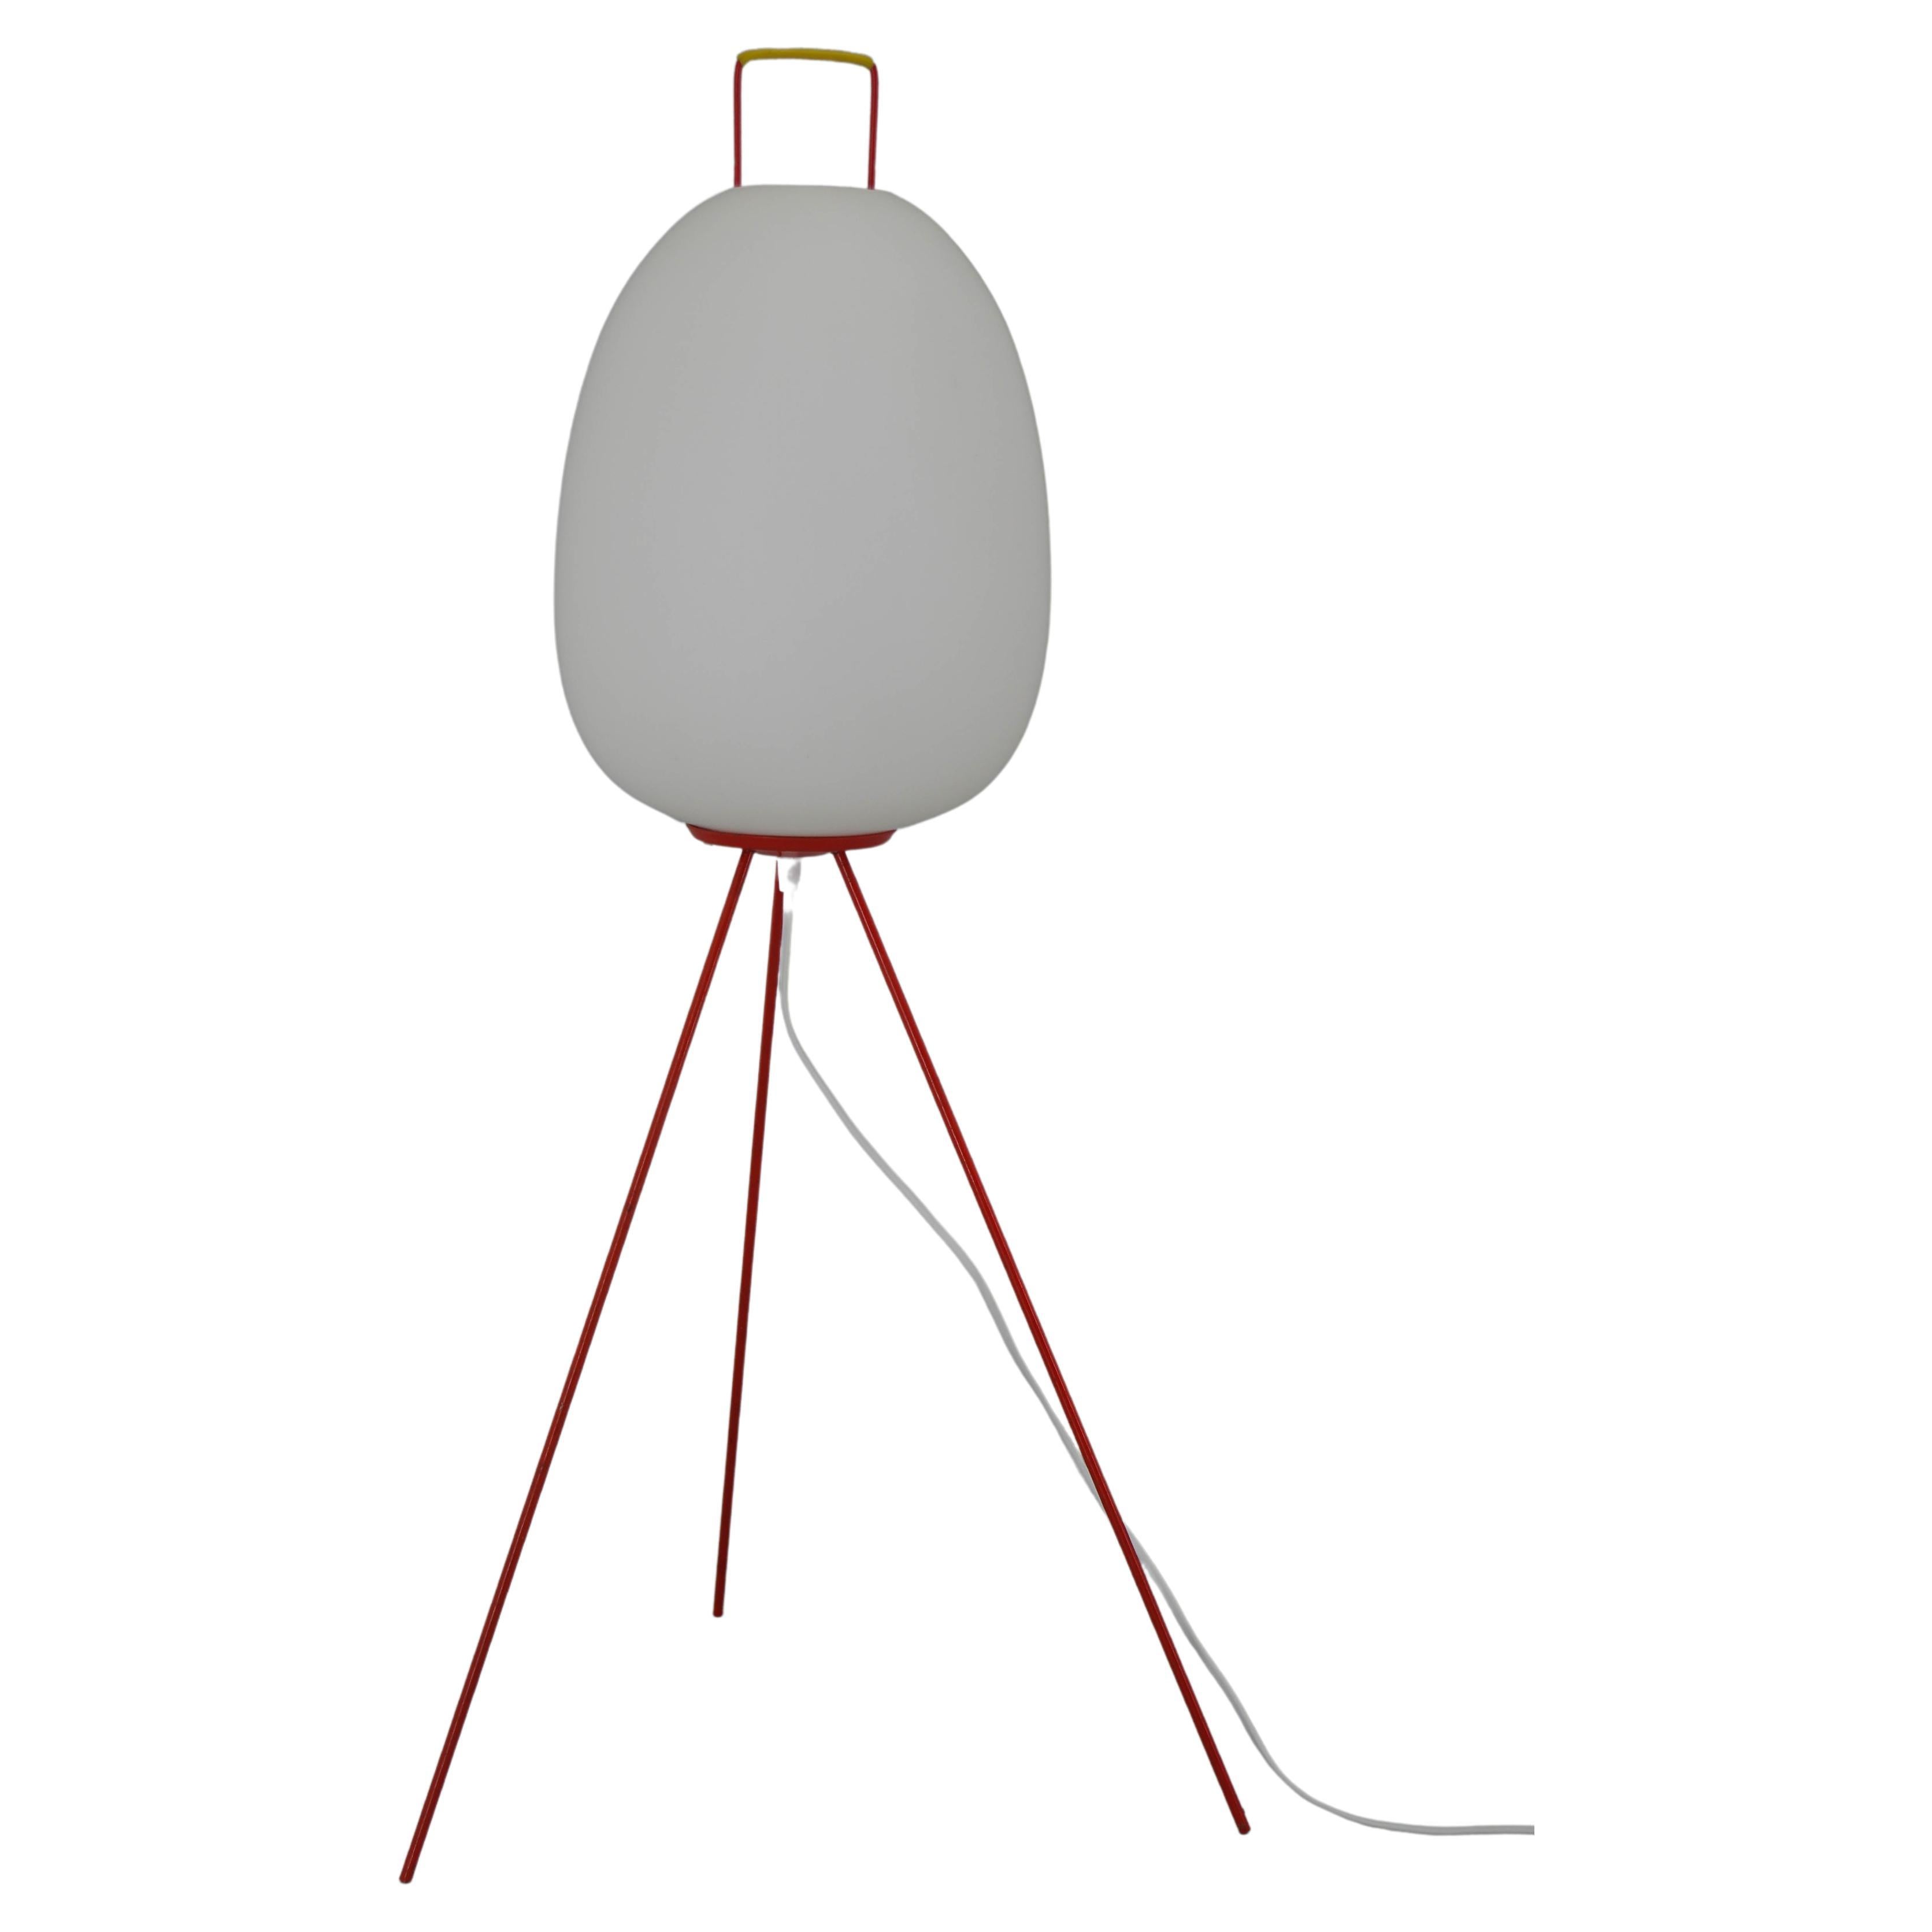 Very Rare Egg Floor Lamp by Napako, 1960s For Sale